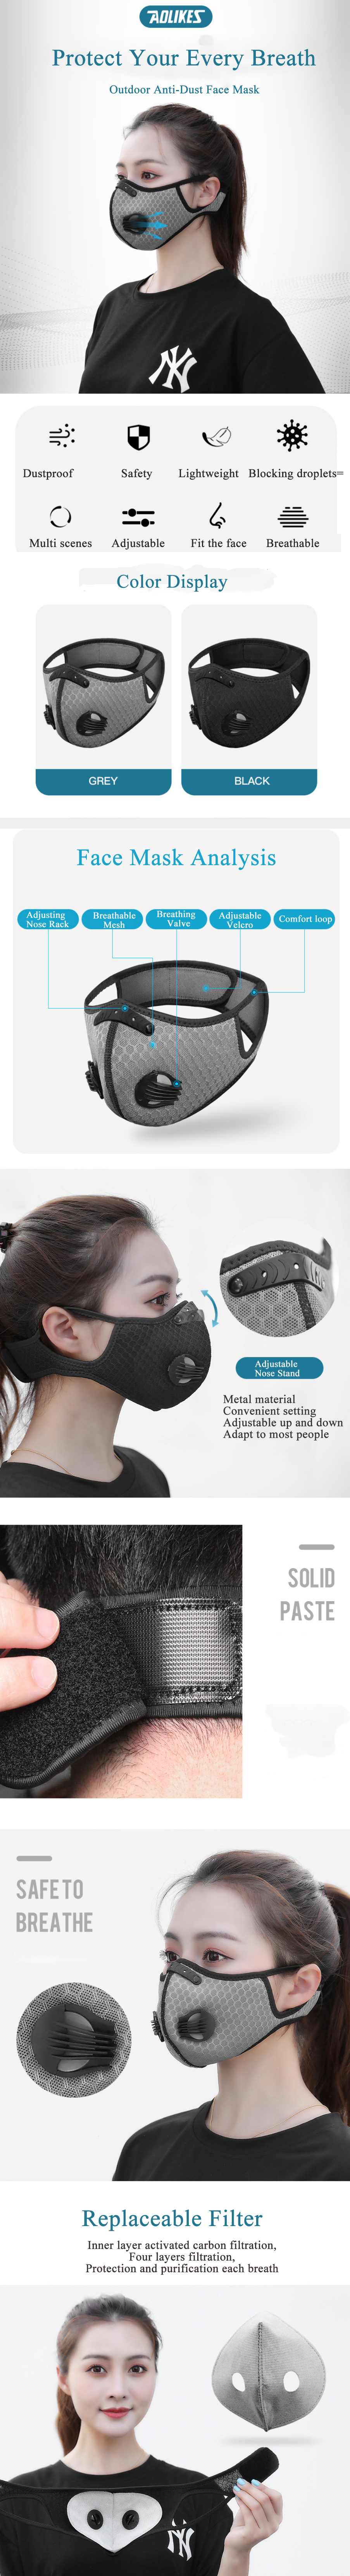 Aolikes-4-Filters-Breathable-Dustproof-Face-Mask-With-Valves-Anit-fog-Bicycle-Respirator-Outdoor-Spo-1662516-1